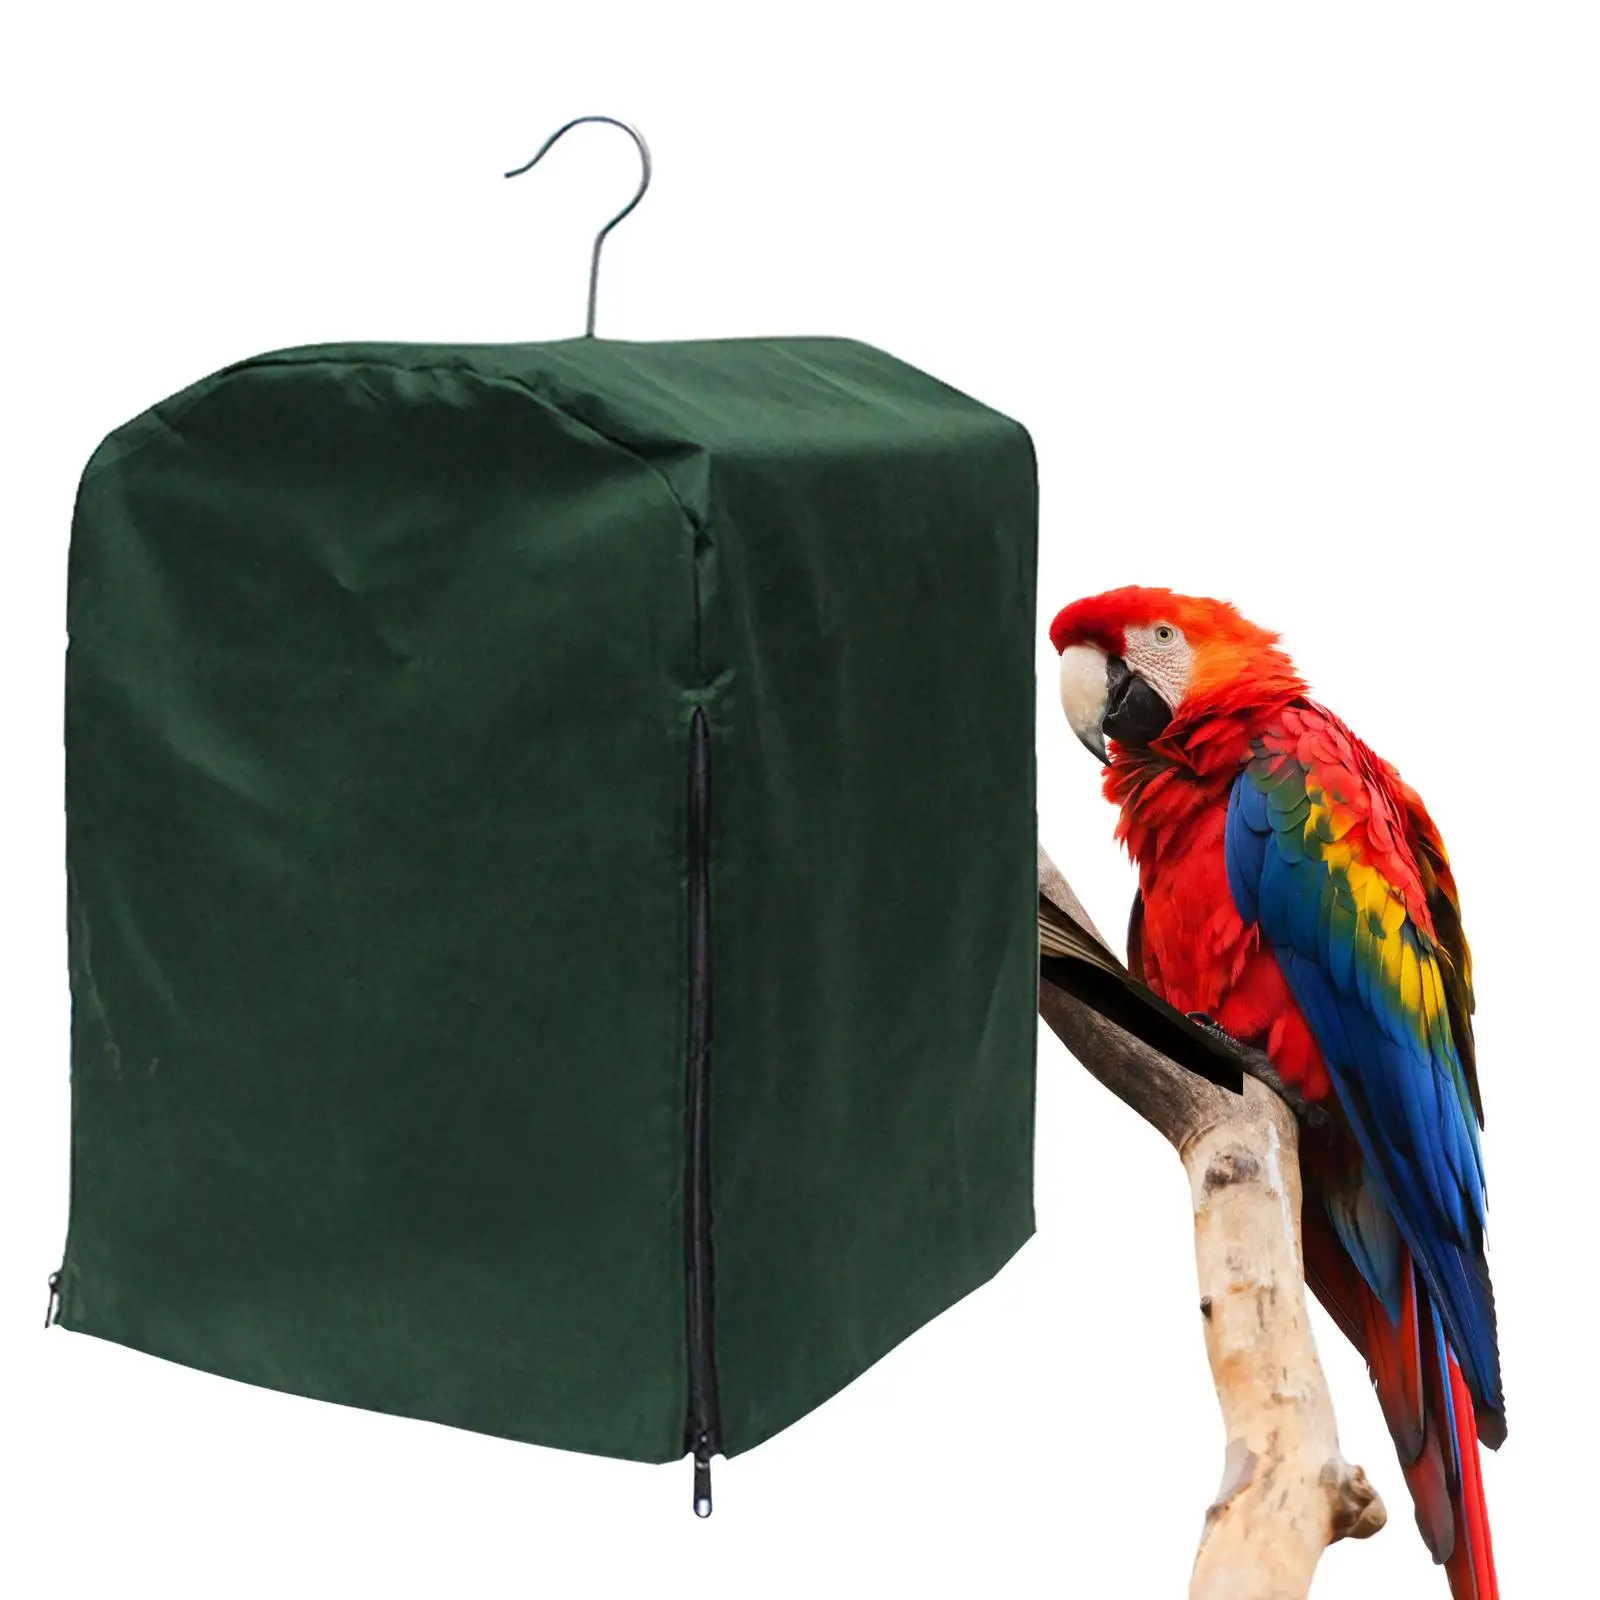 Durable Bird Cage Cover Dustproof Waterproof Lightweight Breathable Green Supplies for Parrot Parakeets Square Animal Budgies